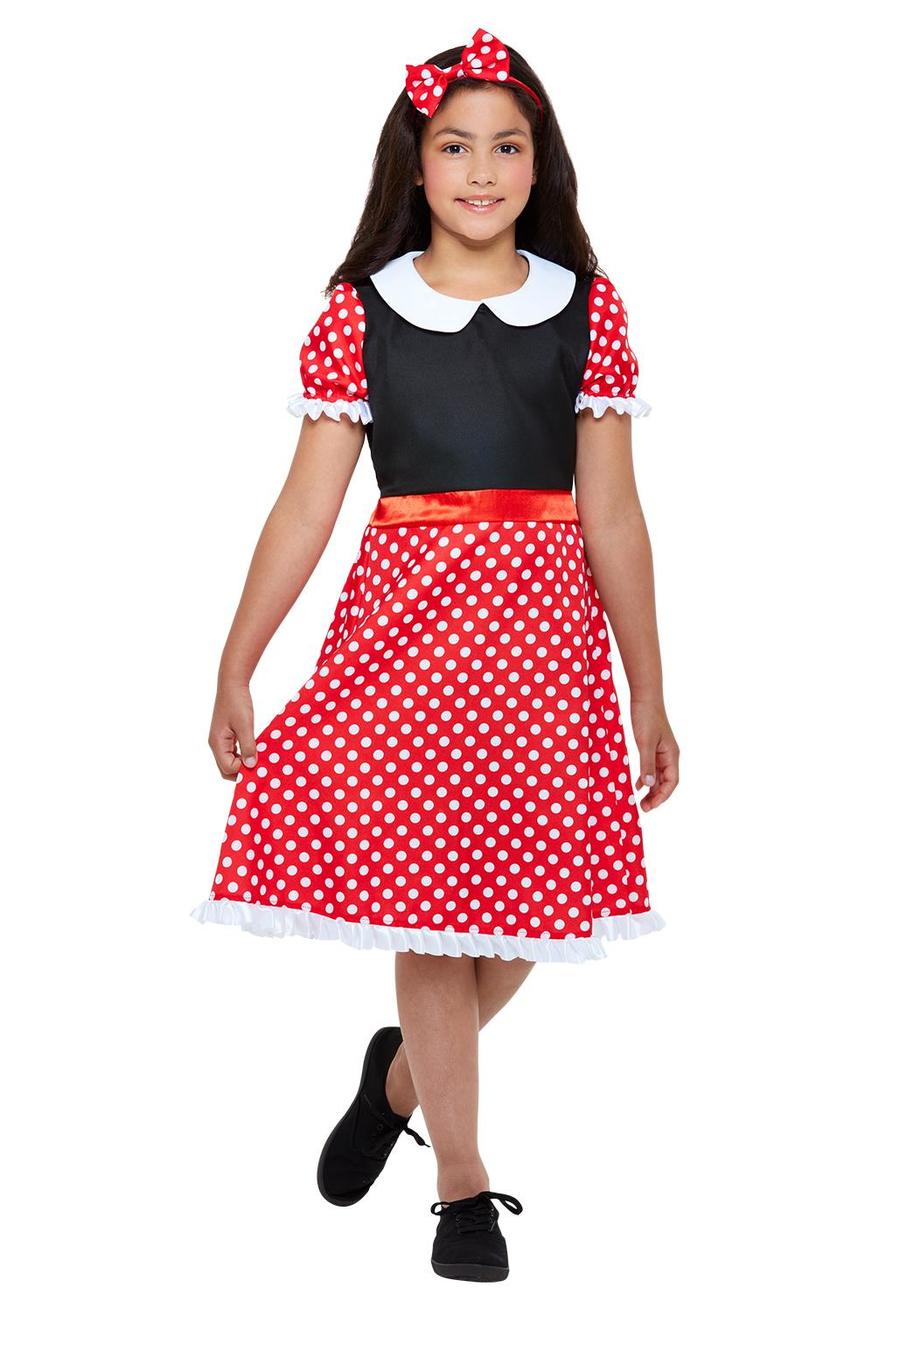 Girls Cute Mouse Costume Wholesale